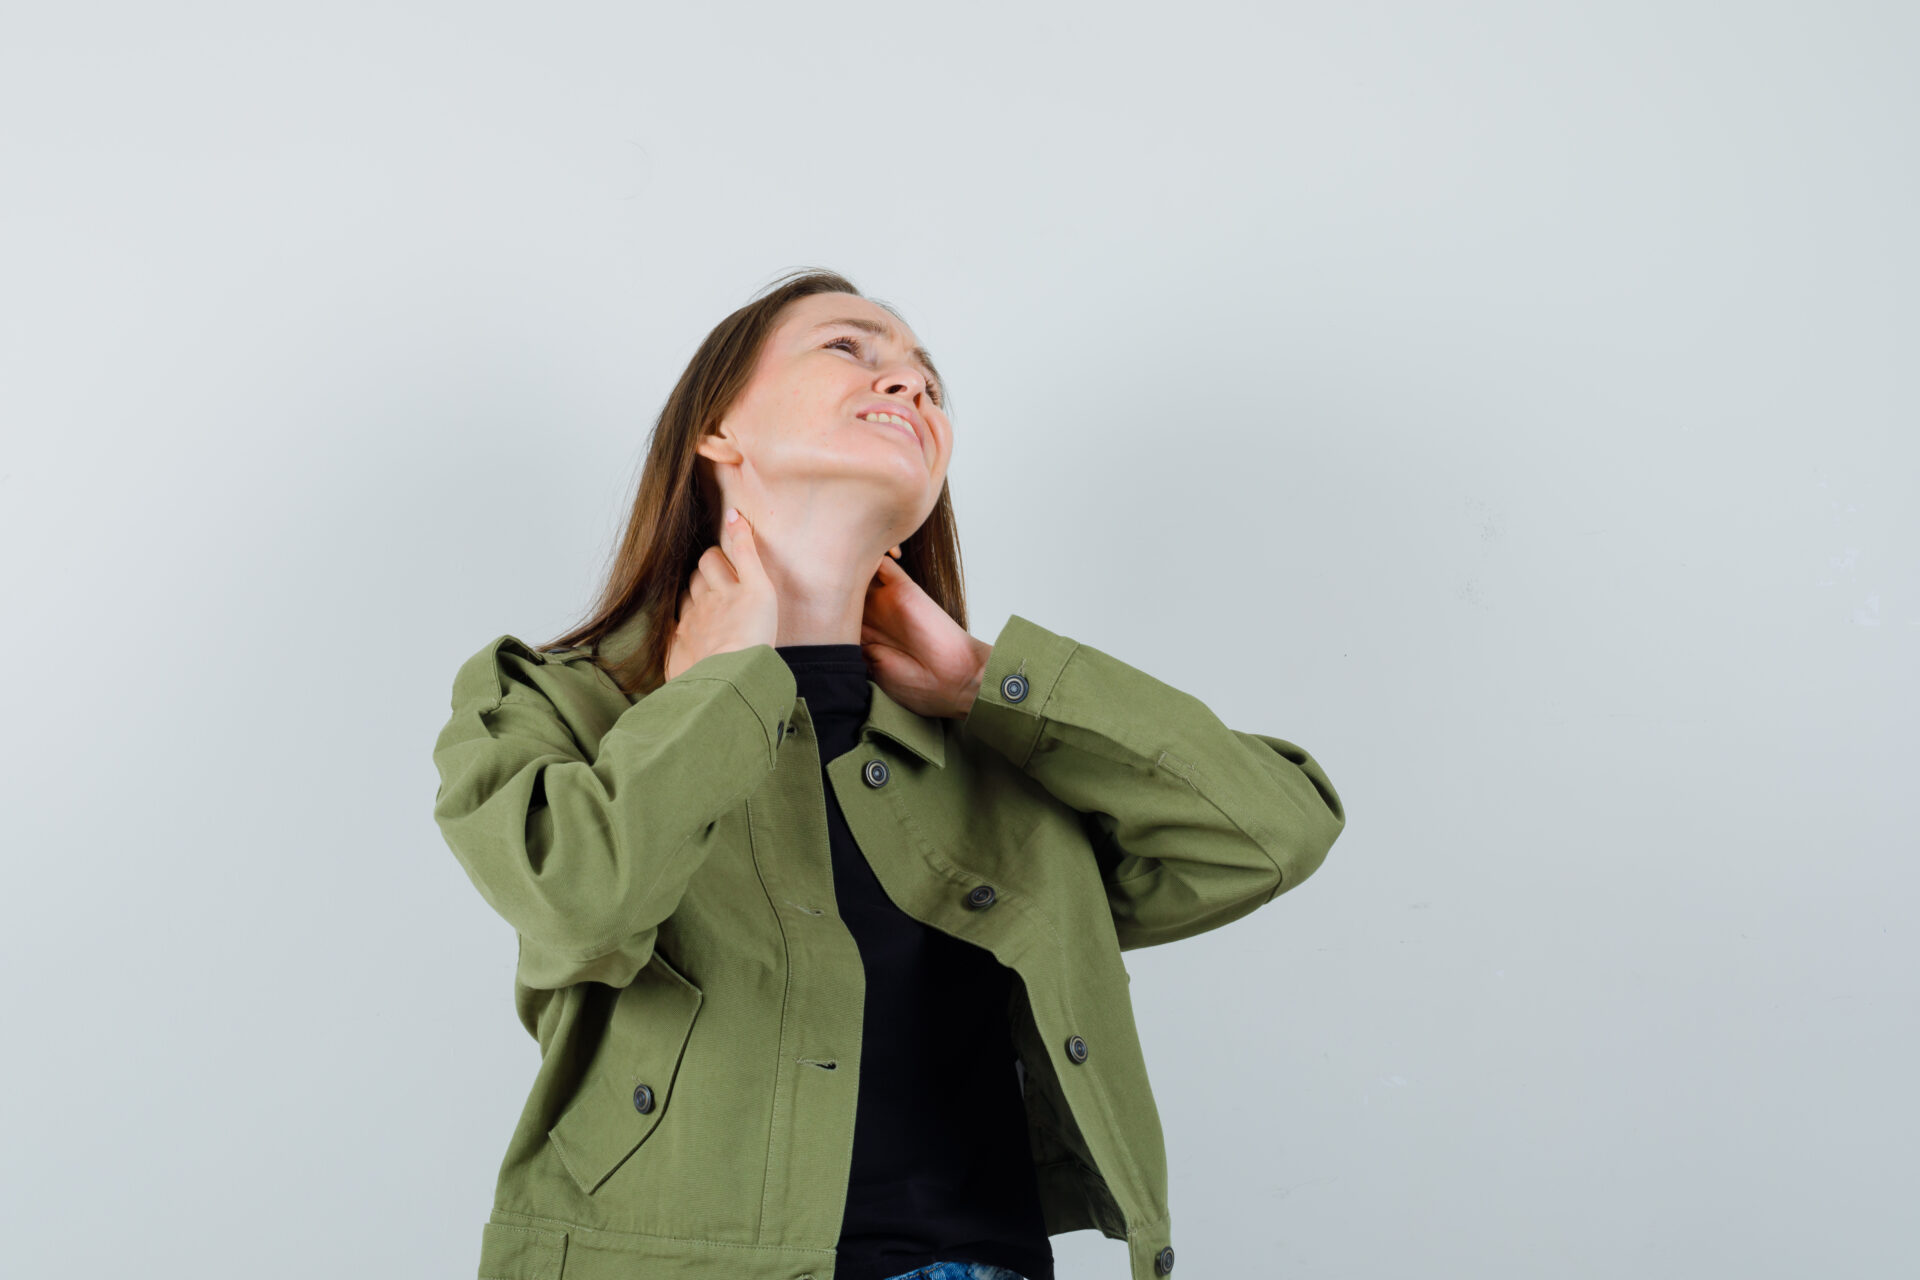 Young woman in green jacket suffering from neck pain and looking uncomfortable , front view.